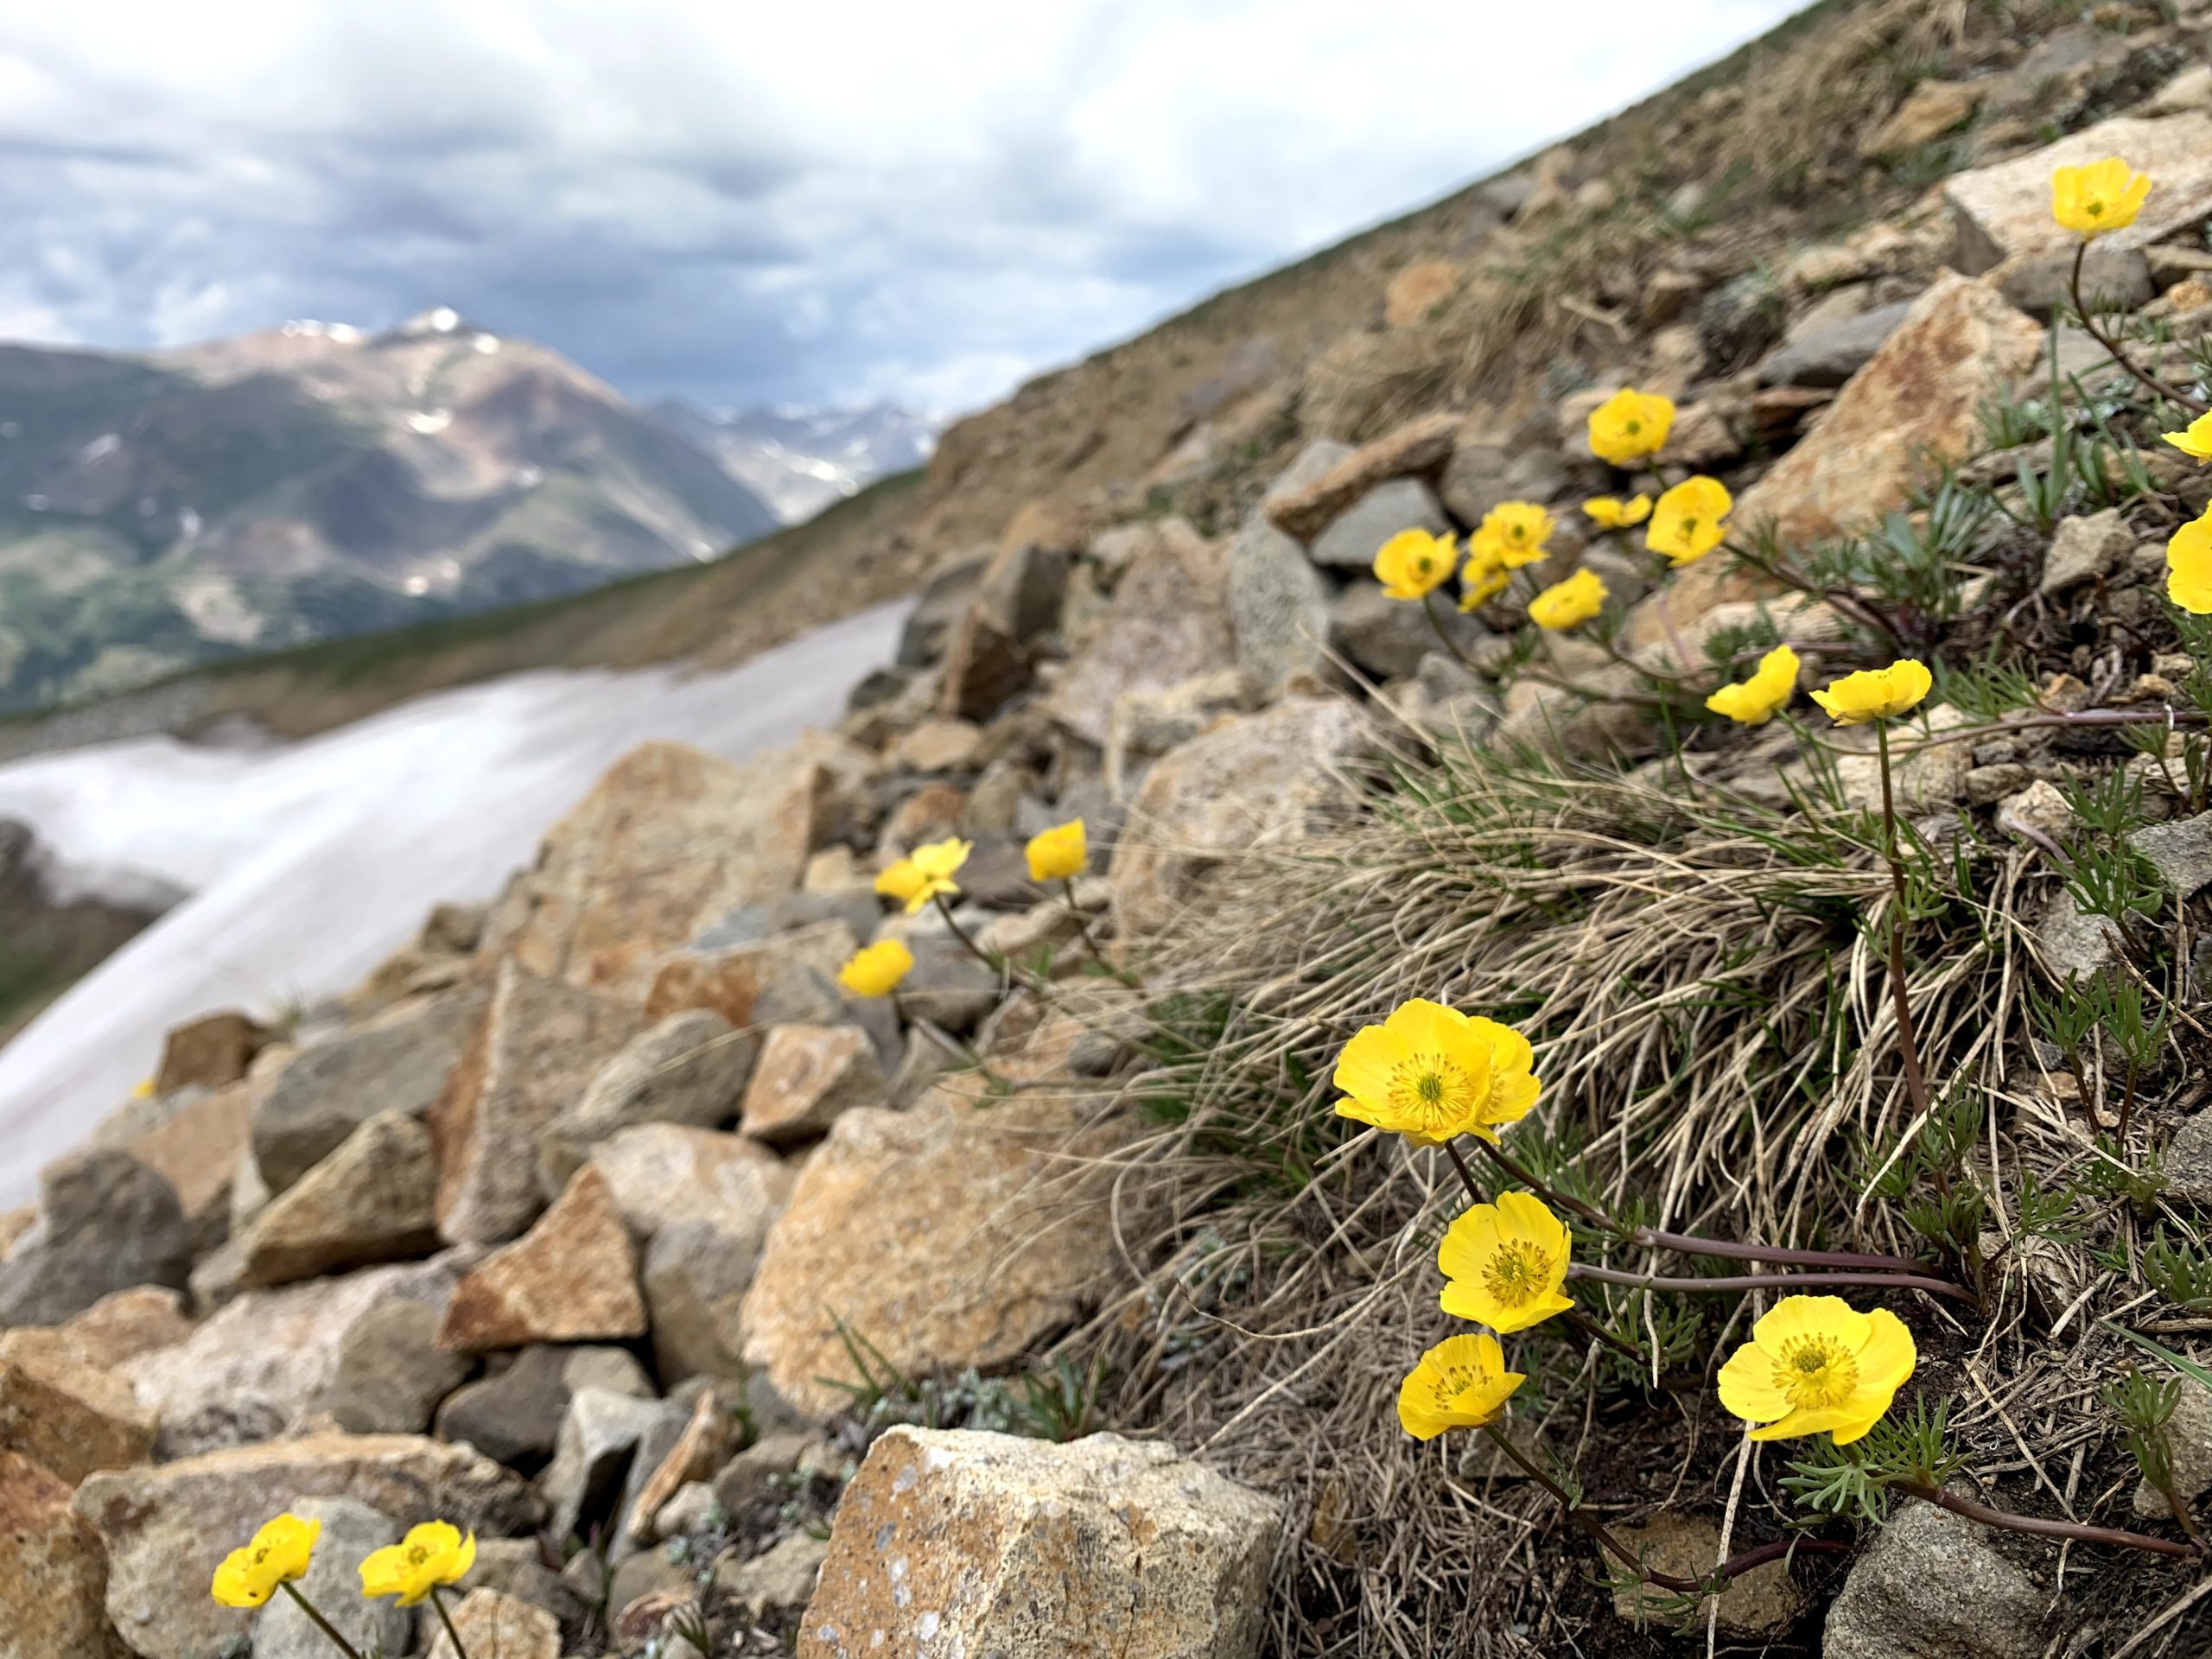 Yellow flowers at altitude with snow - Betty Ford Alpine Gardens